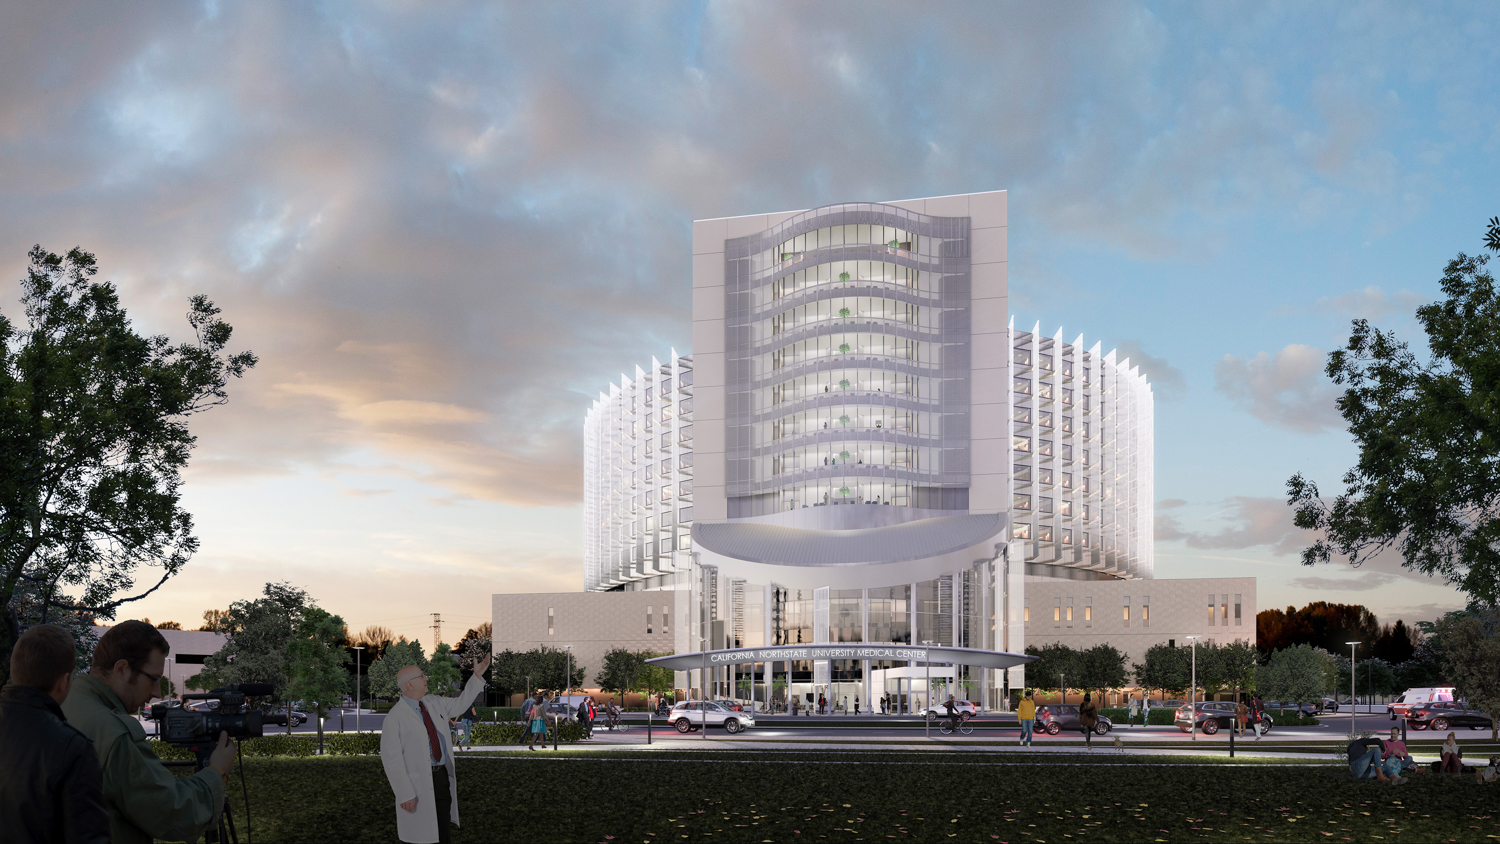 California Northstate University proposed Natomas building front view, design by Fong & Chan Architects